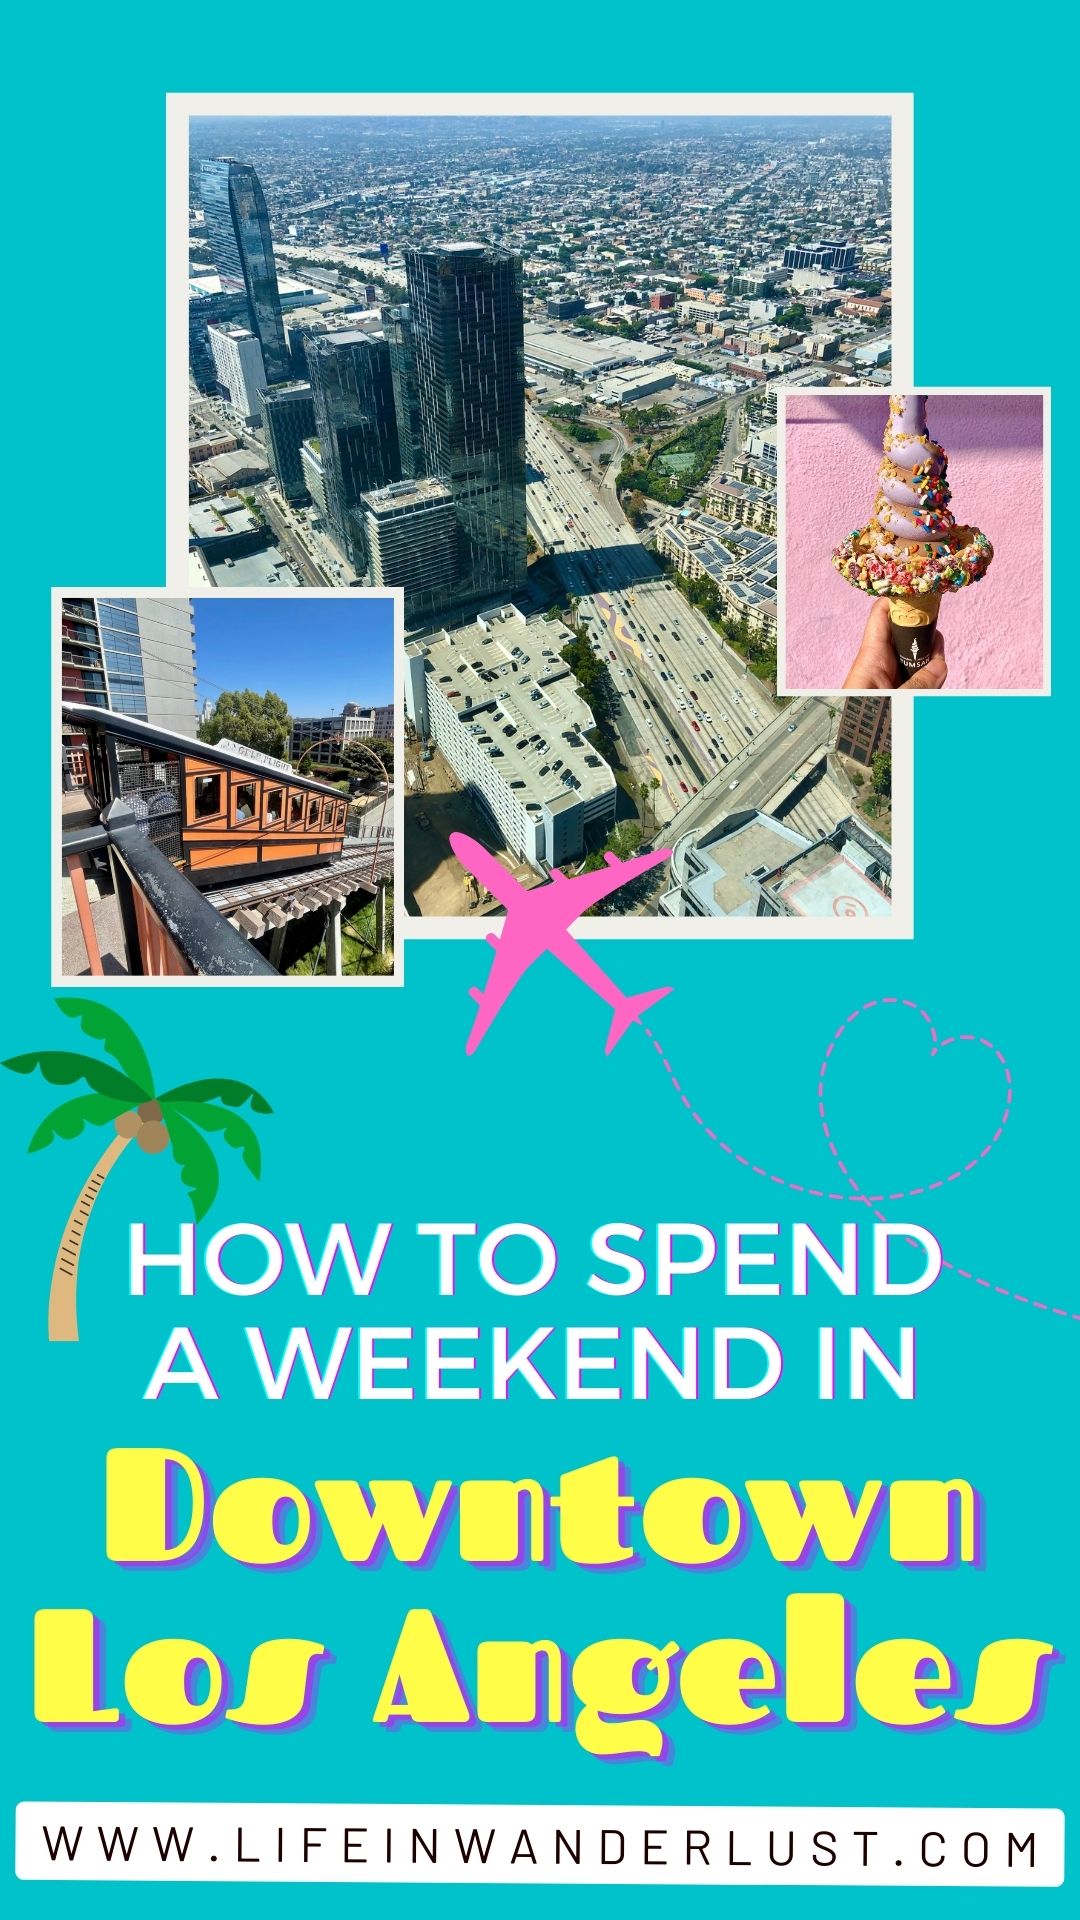 How to spend a weekend in DTLA